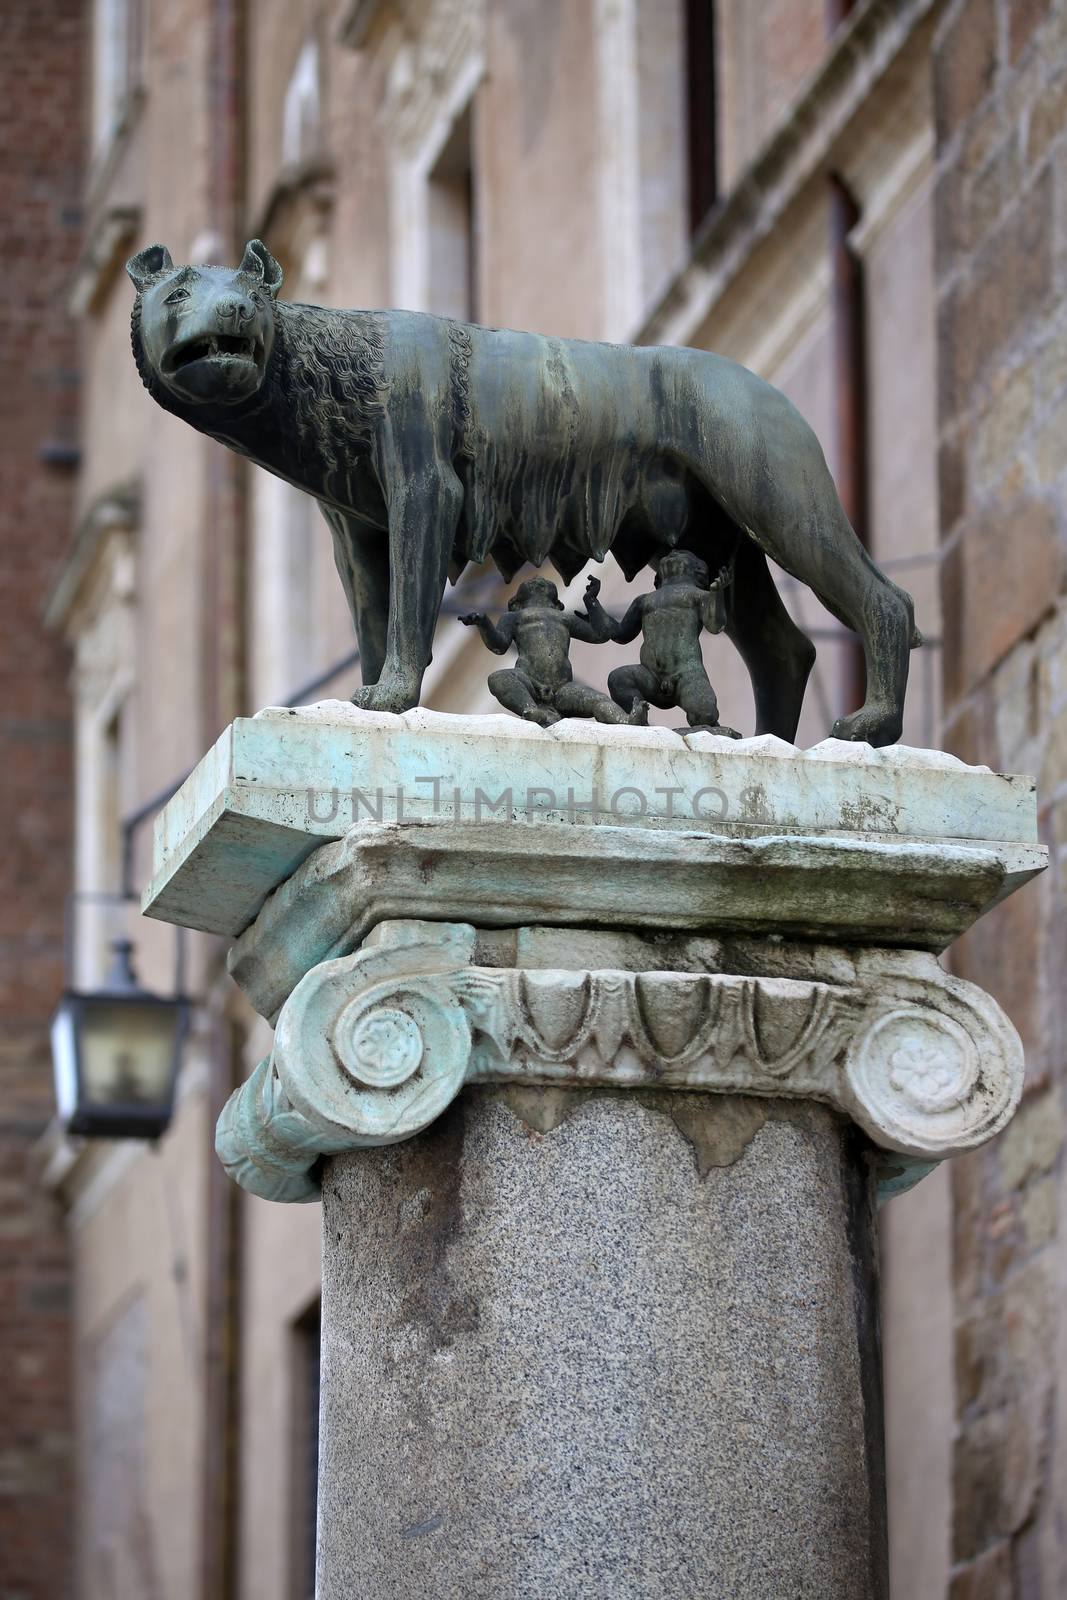 The statue of Romul and Remus in Rome, Italy